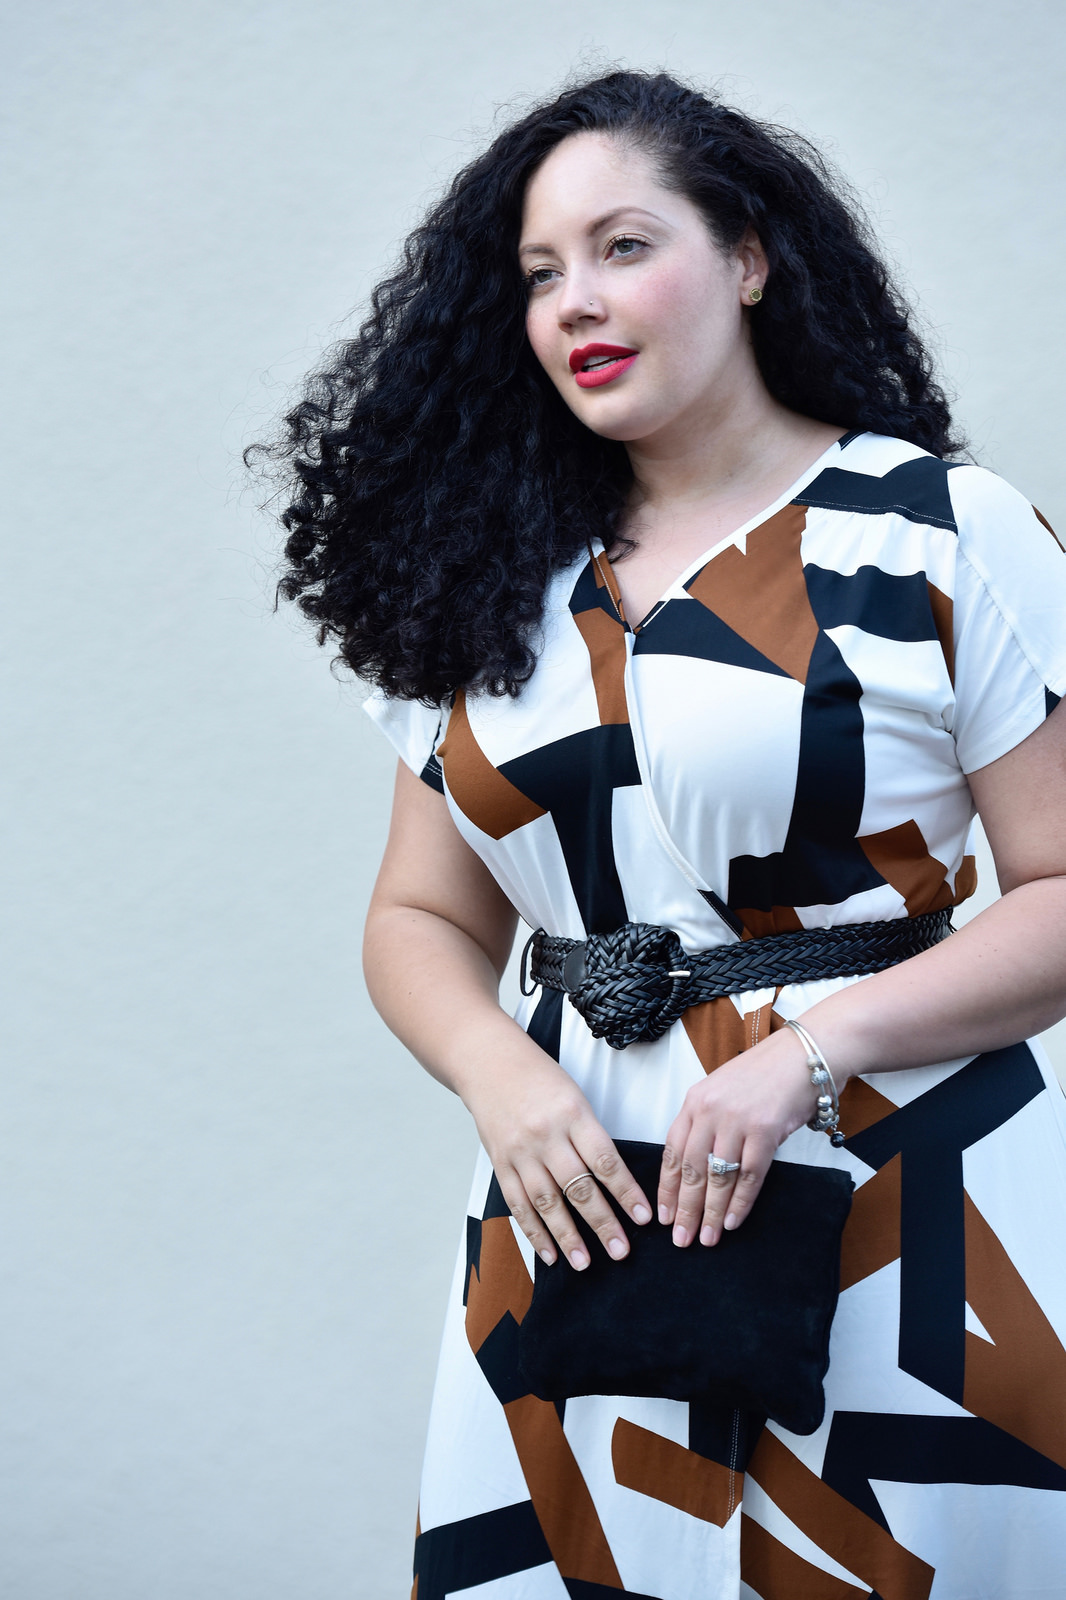 The High-Low Dress You Need Now via @GirlwithCurves